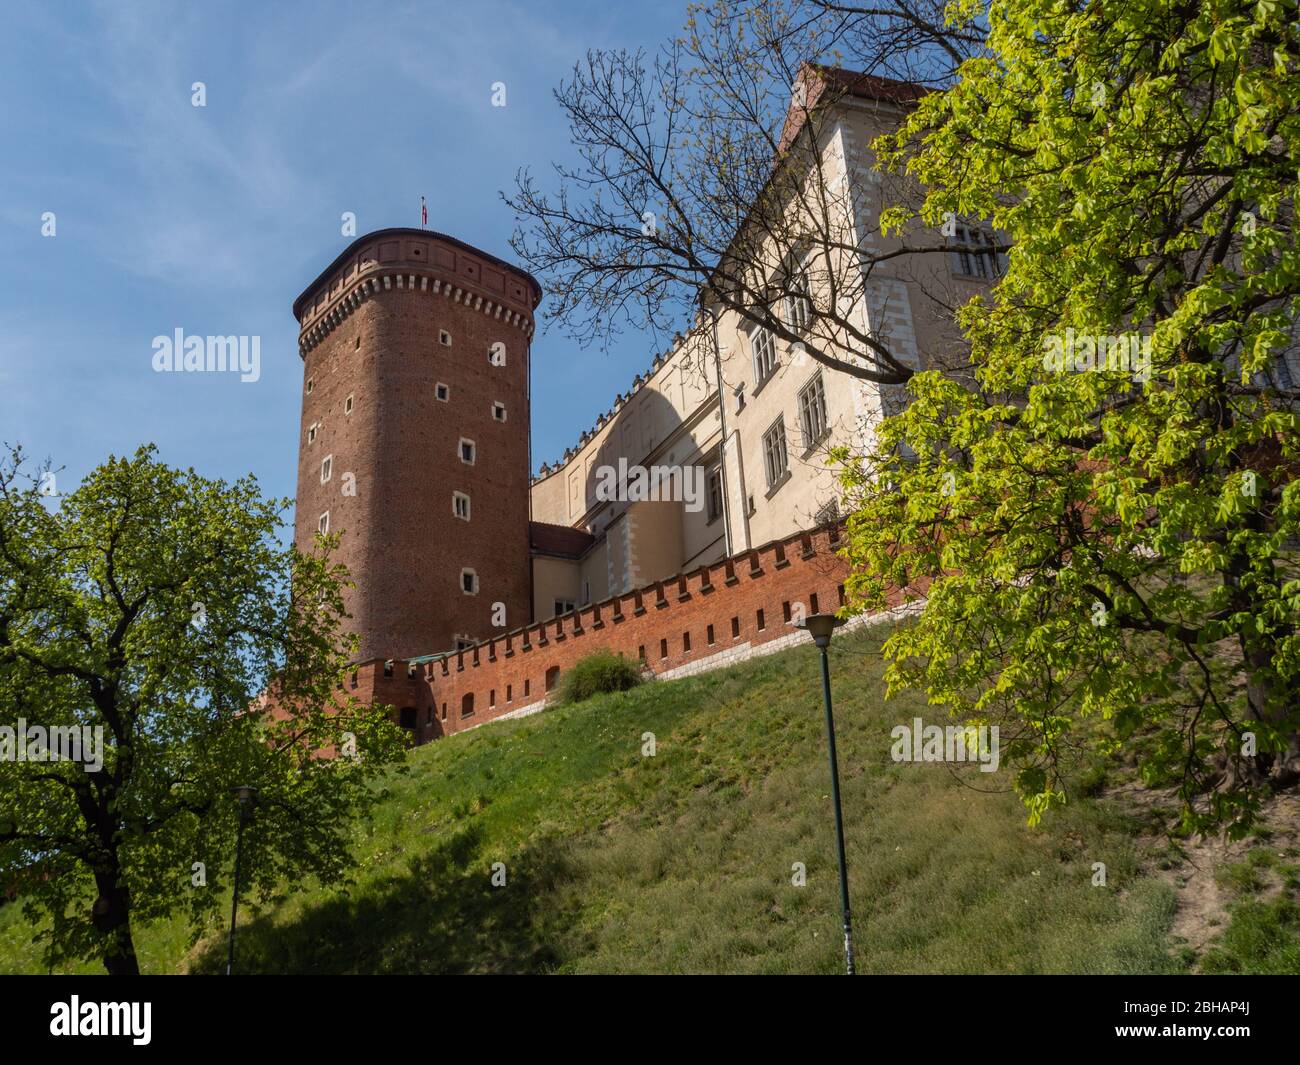 Senator's tower of Wawel Castle, fomer royal residence. Famouse touristic attraction in Cracow, Poland. Stock Photo